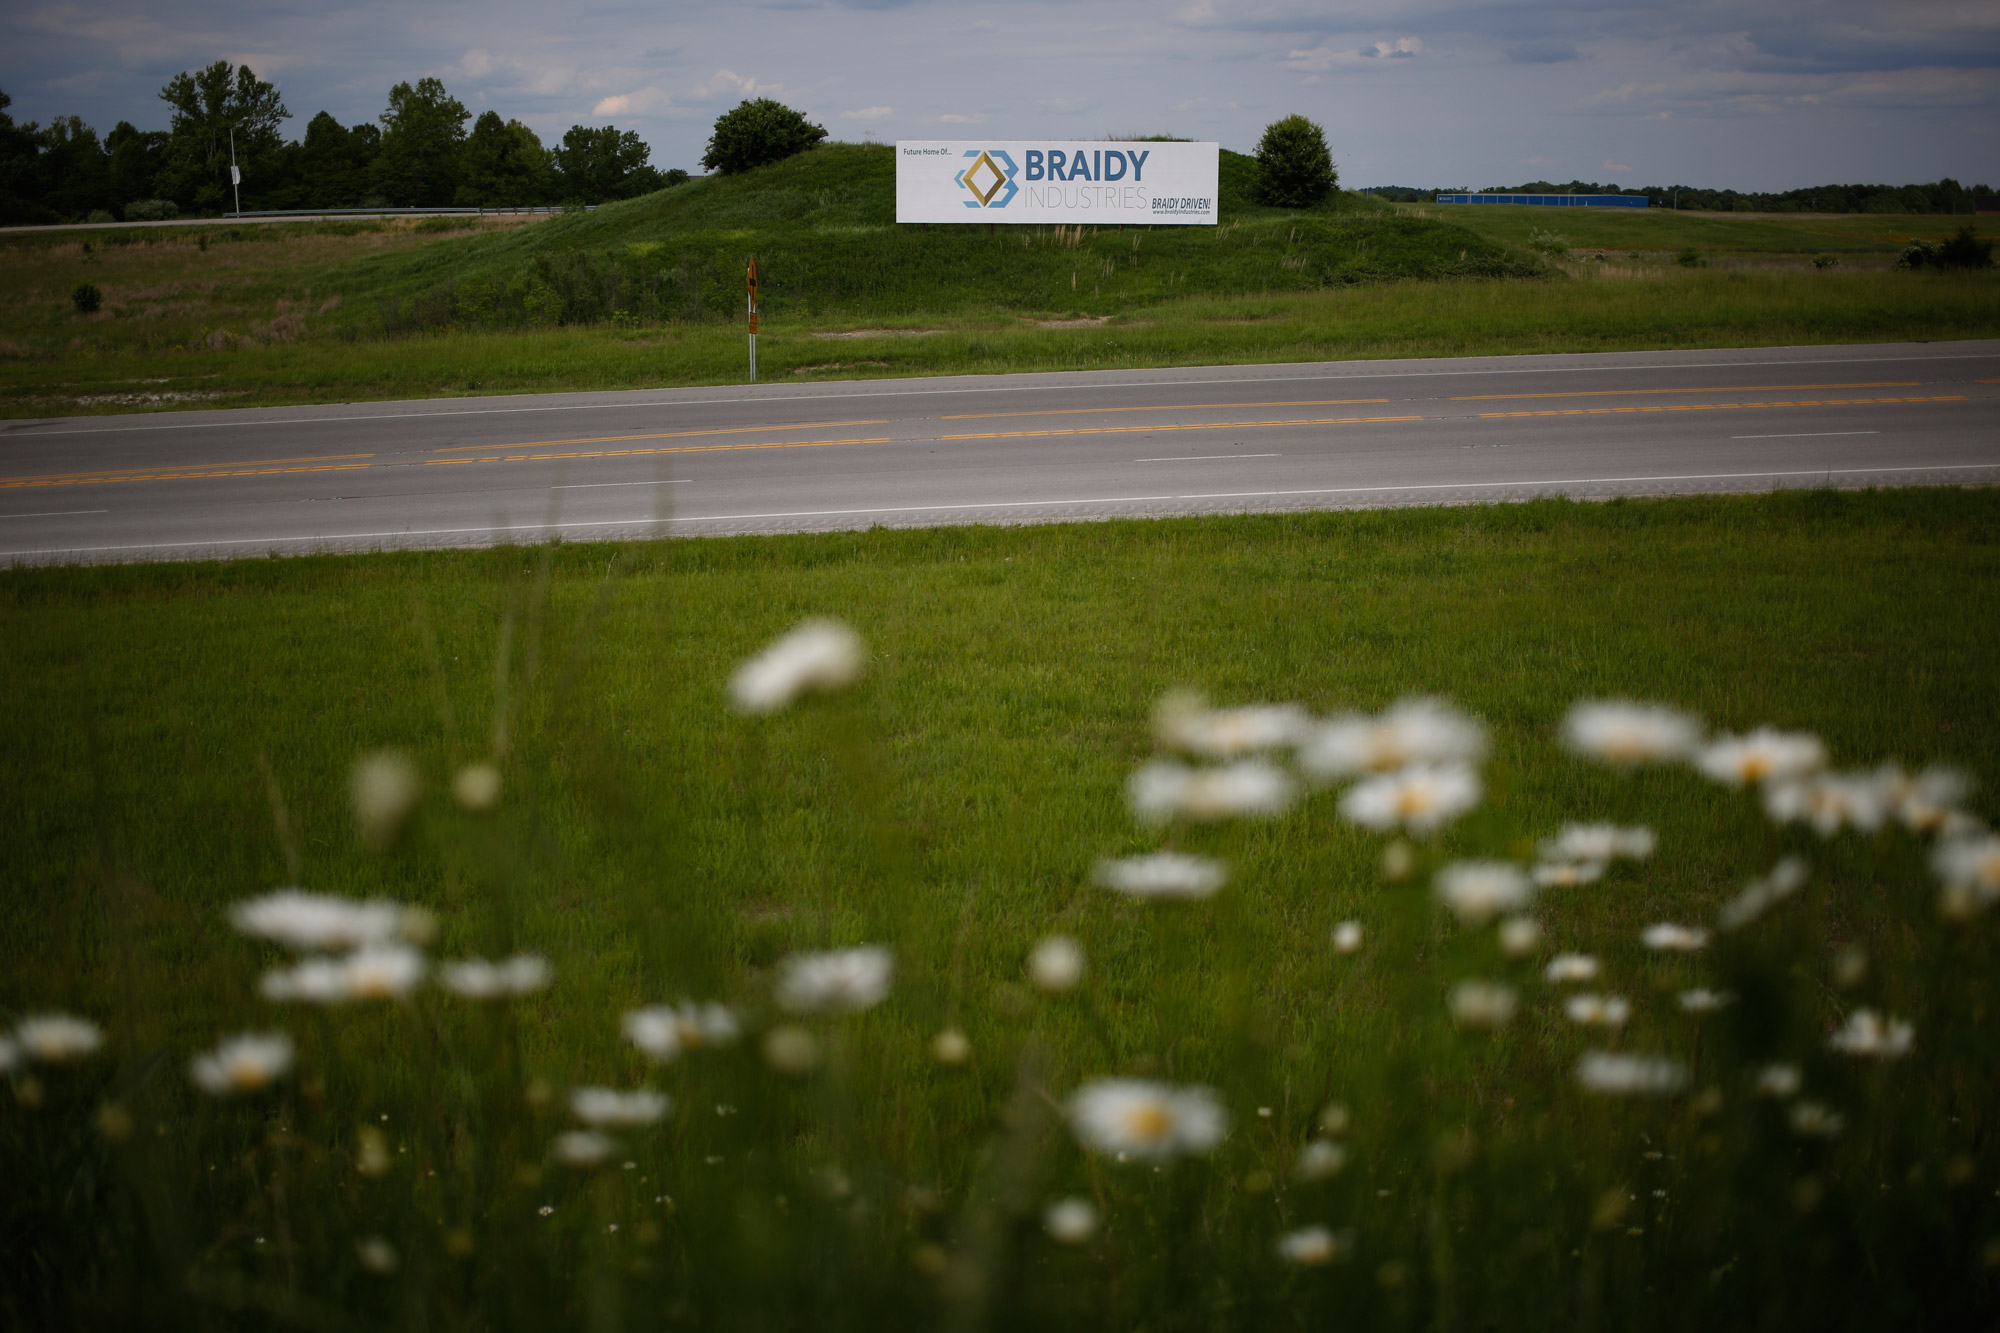 A Braidy sign looms over the future location of the company’s aluminum mill in northeastern Kentucky (Luke Sharrett for TIME)